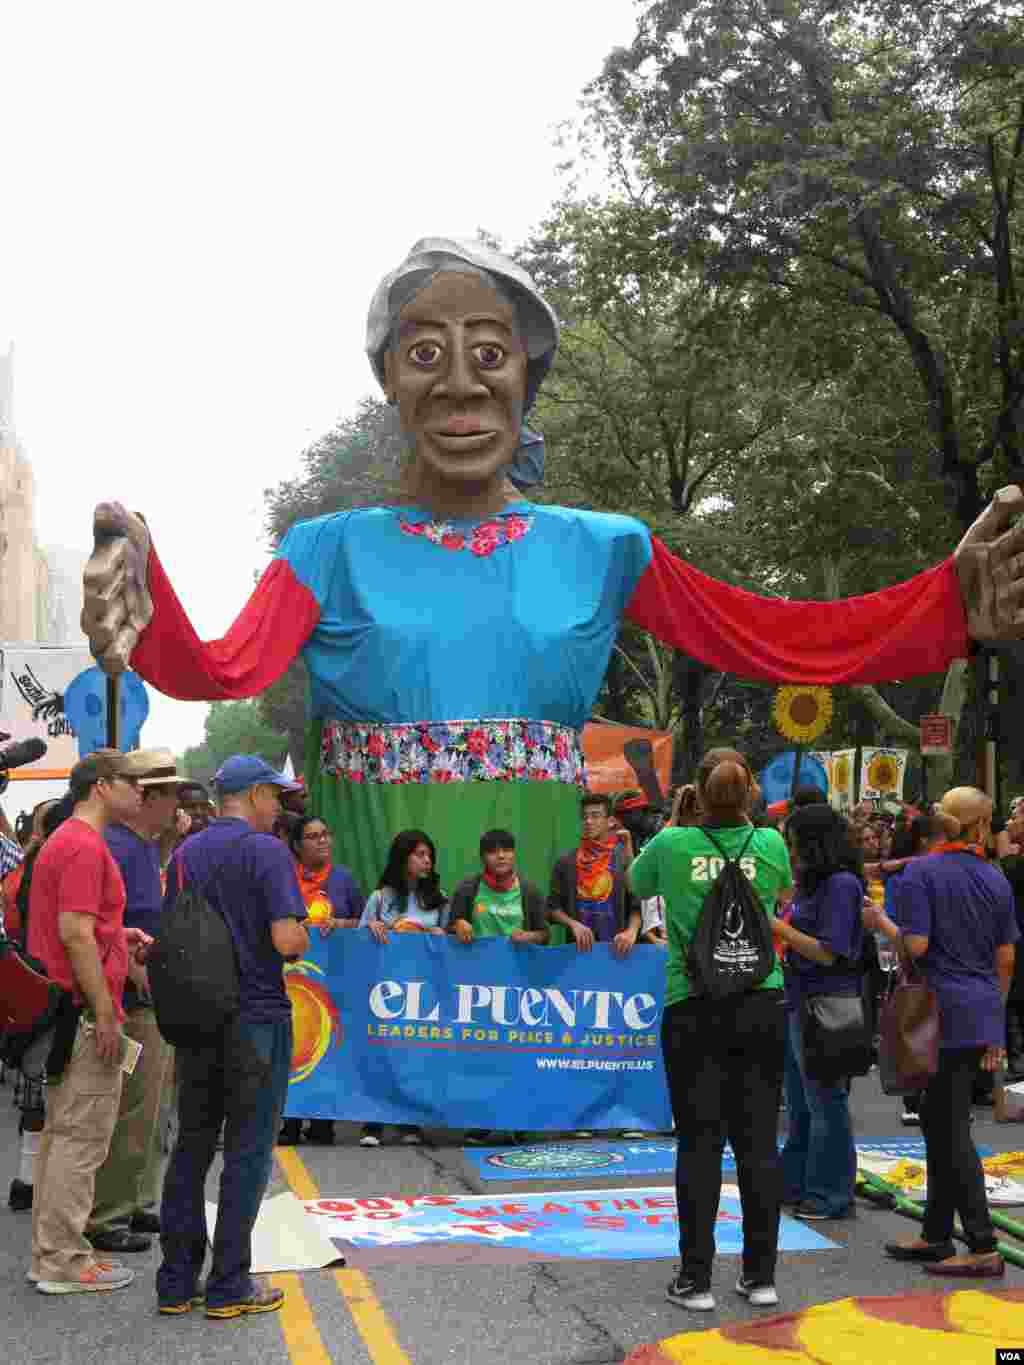 Part parade, part protest colorful floats lined the route from Central Park to the United Nations. (Rosanne Skirble/VOA)